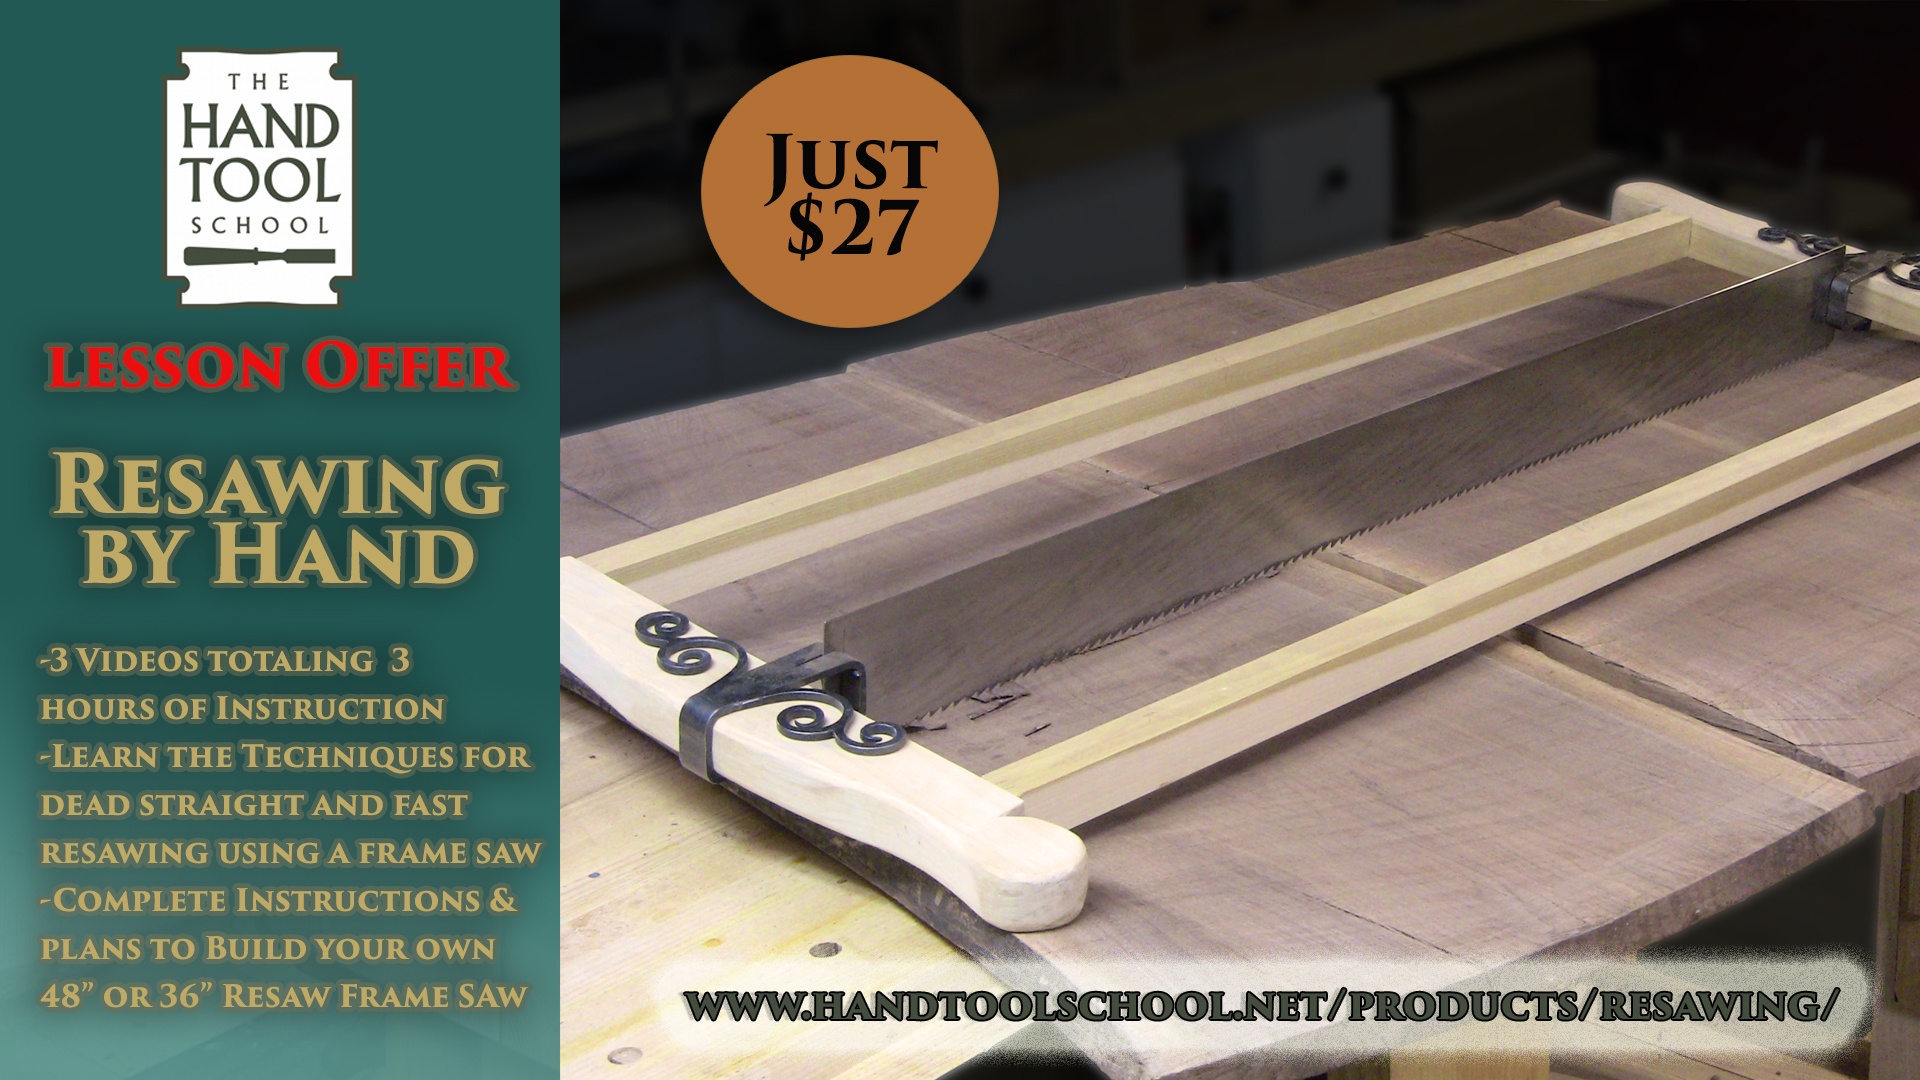 learn to resaw by hand and build a frame saw